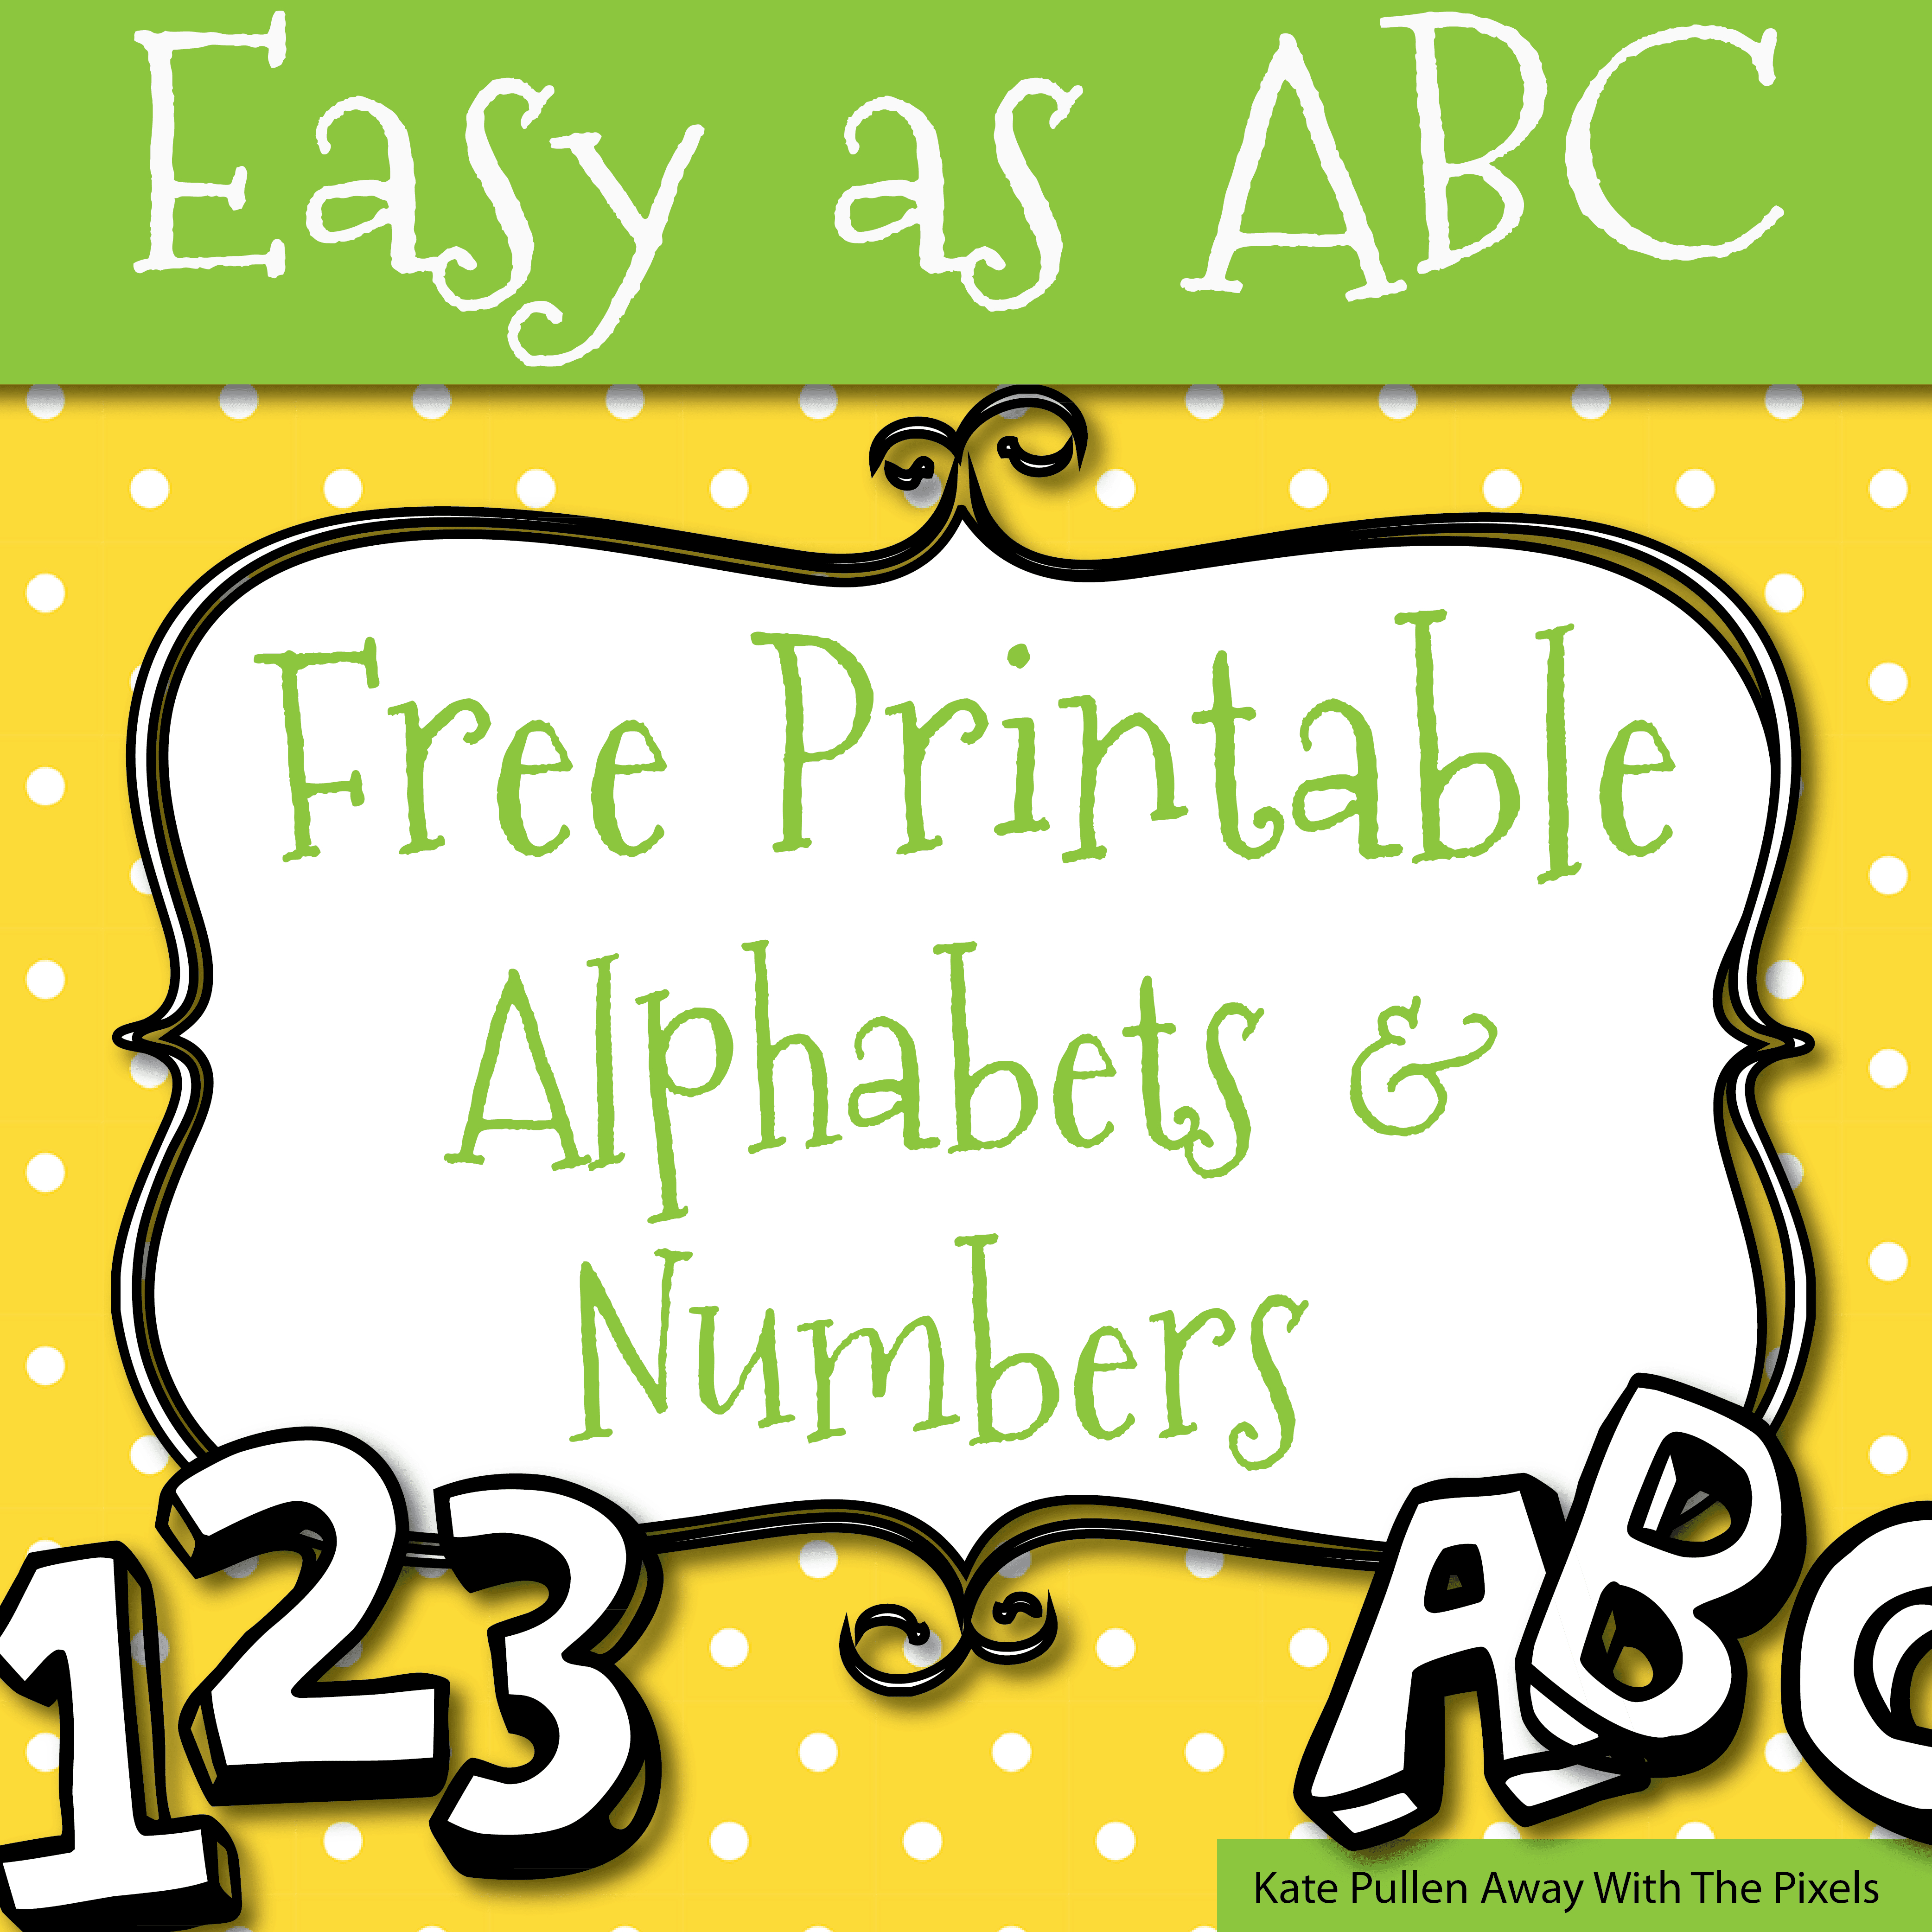 Free Printable Letters And Numbers For Crafts - Free Printable Alphabet Letters